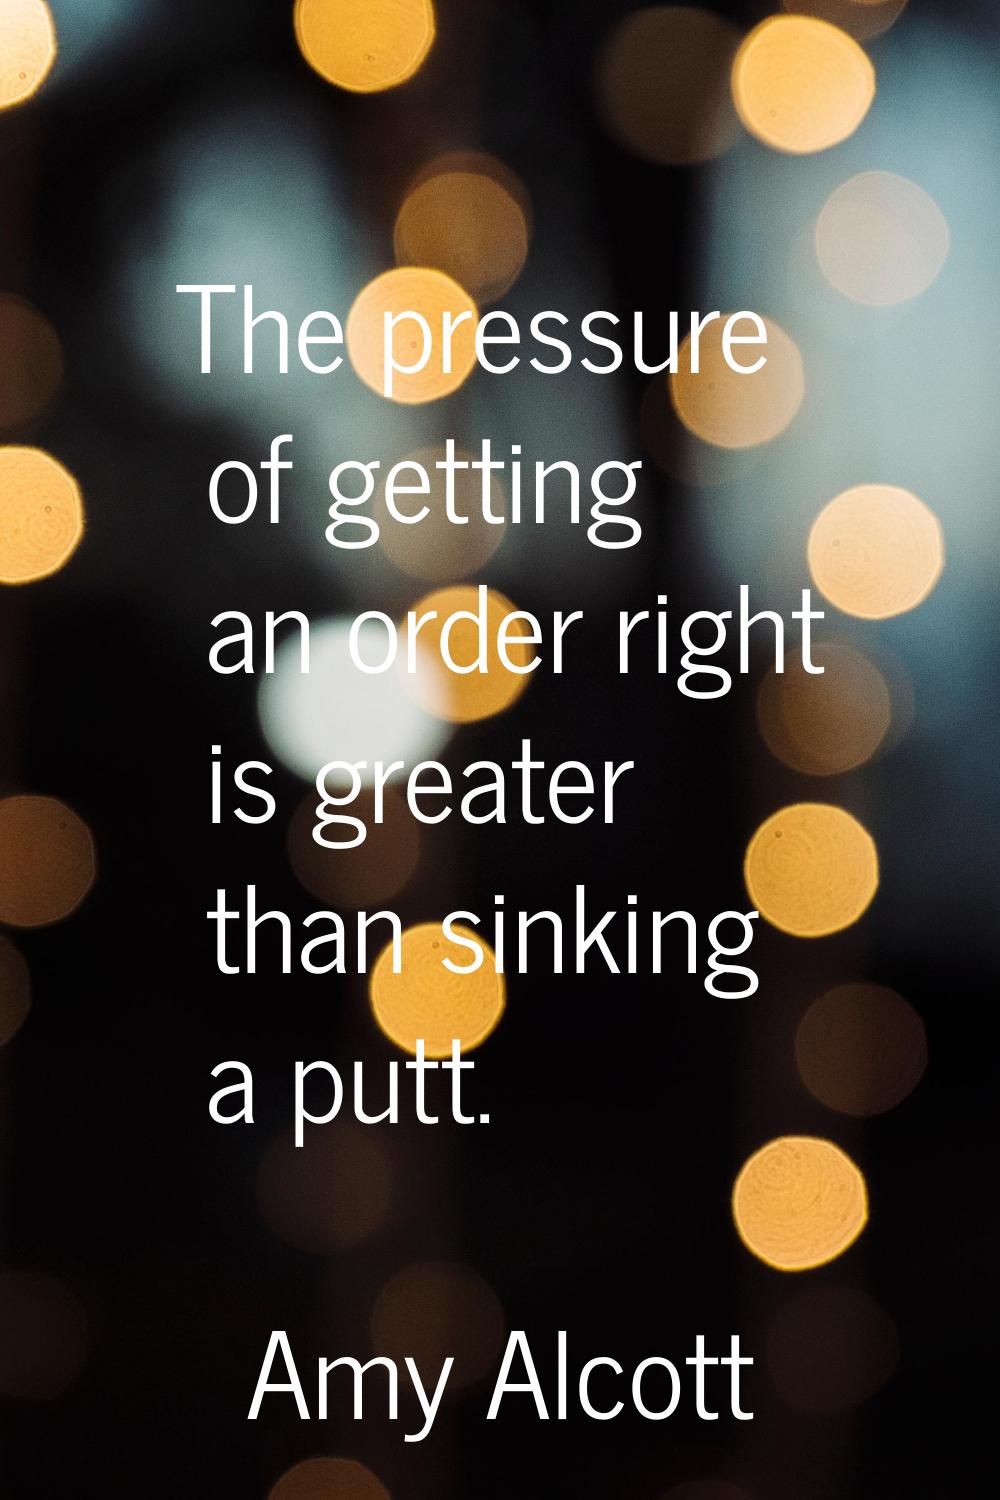 The pressure of getting an order right is greater than sinking a putt.